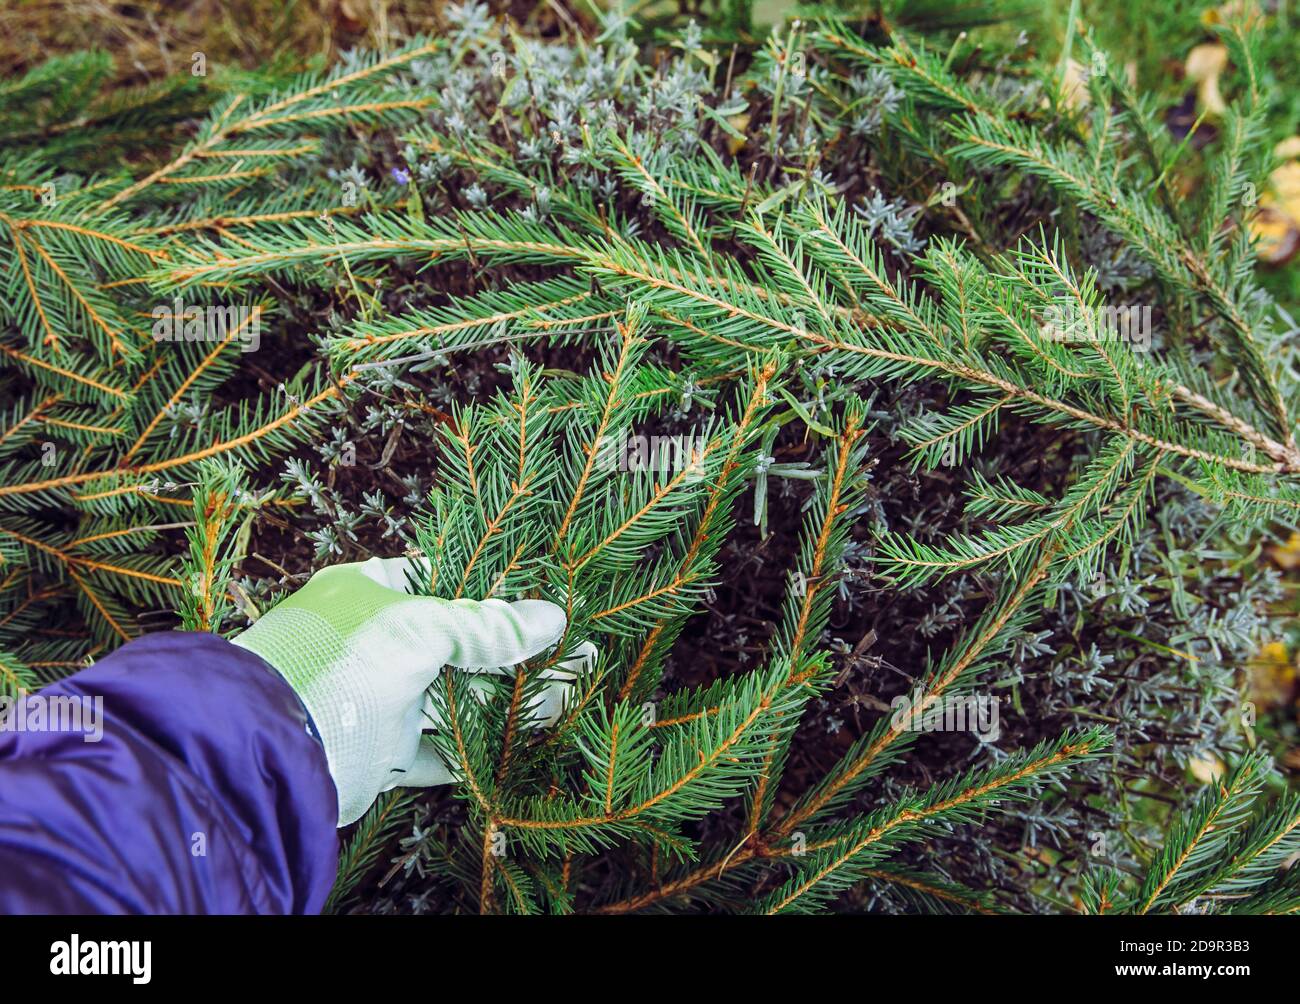 Winter cold damage prevention in home garden concept. Covering lavender flower bush with spruce tree branches so the plant will survive winter cold. Stock Photo